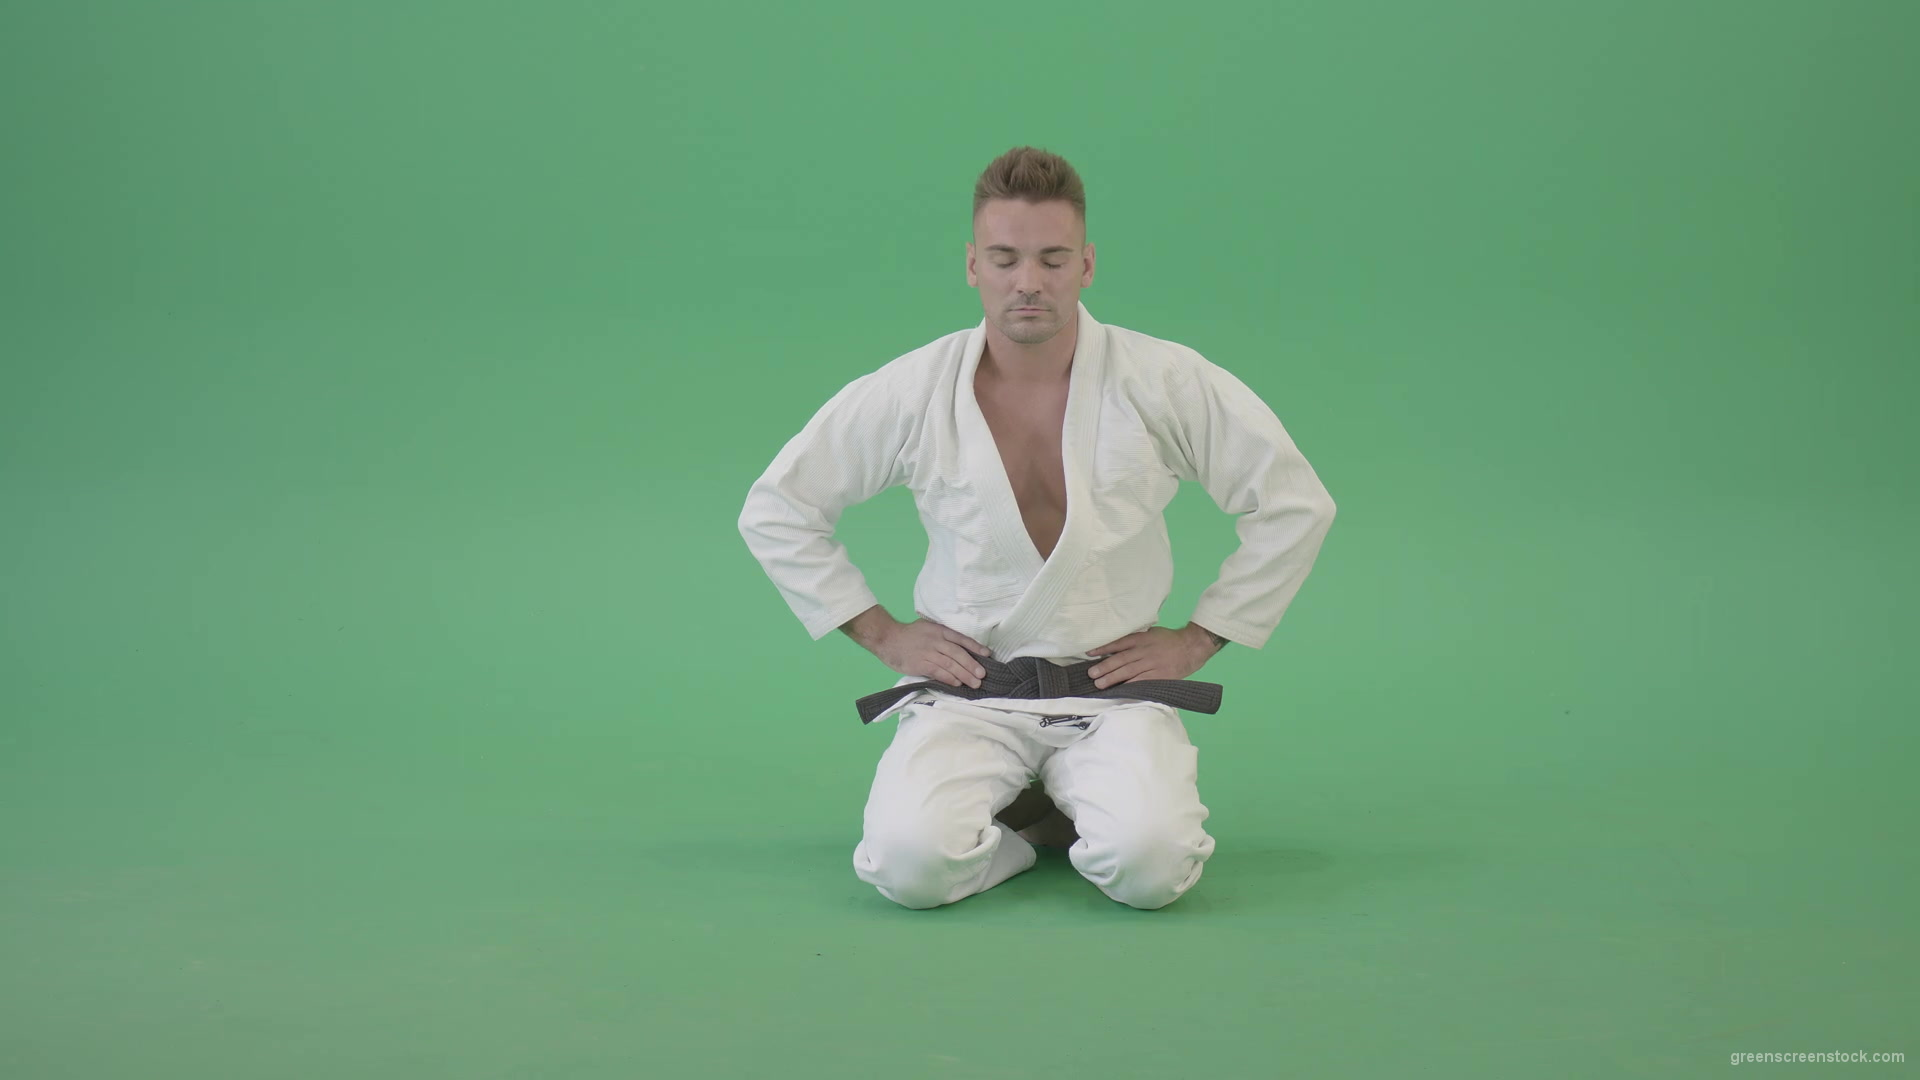 Jujutsu-Sport-man-meditating-and-breathing-slowly-isolated-on-green-screen-4K-Video-Footage-1920_005 Green Screen Stock